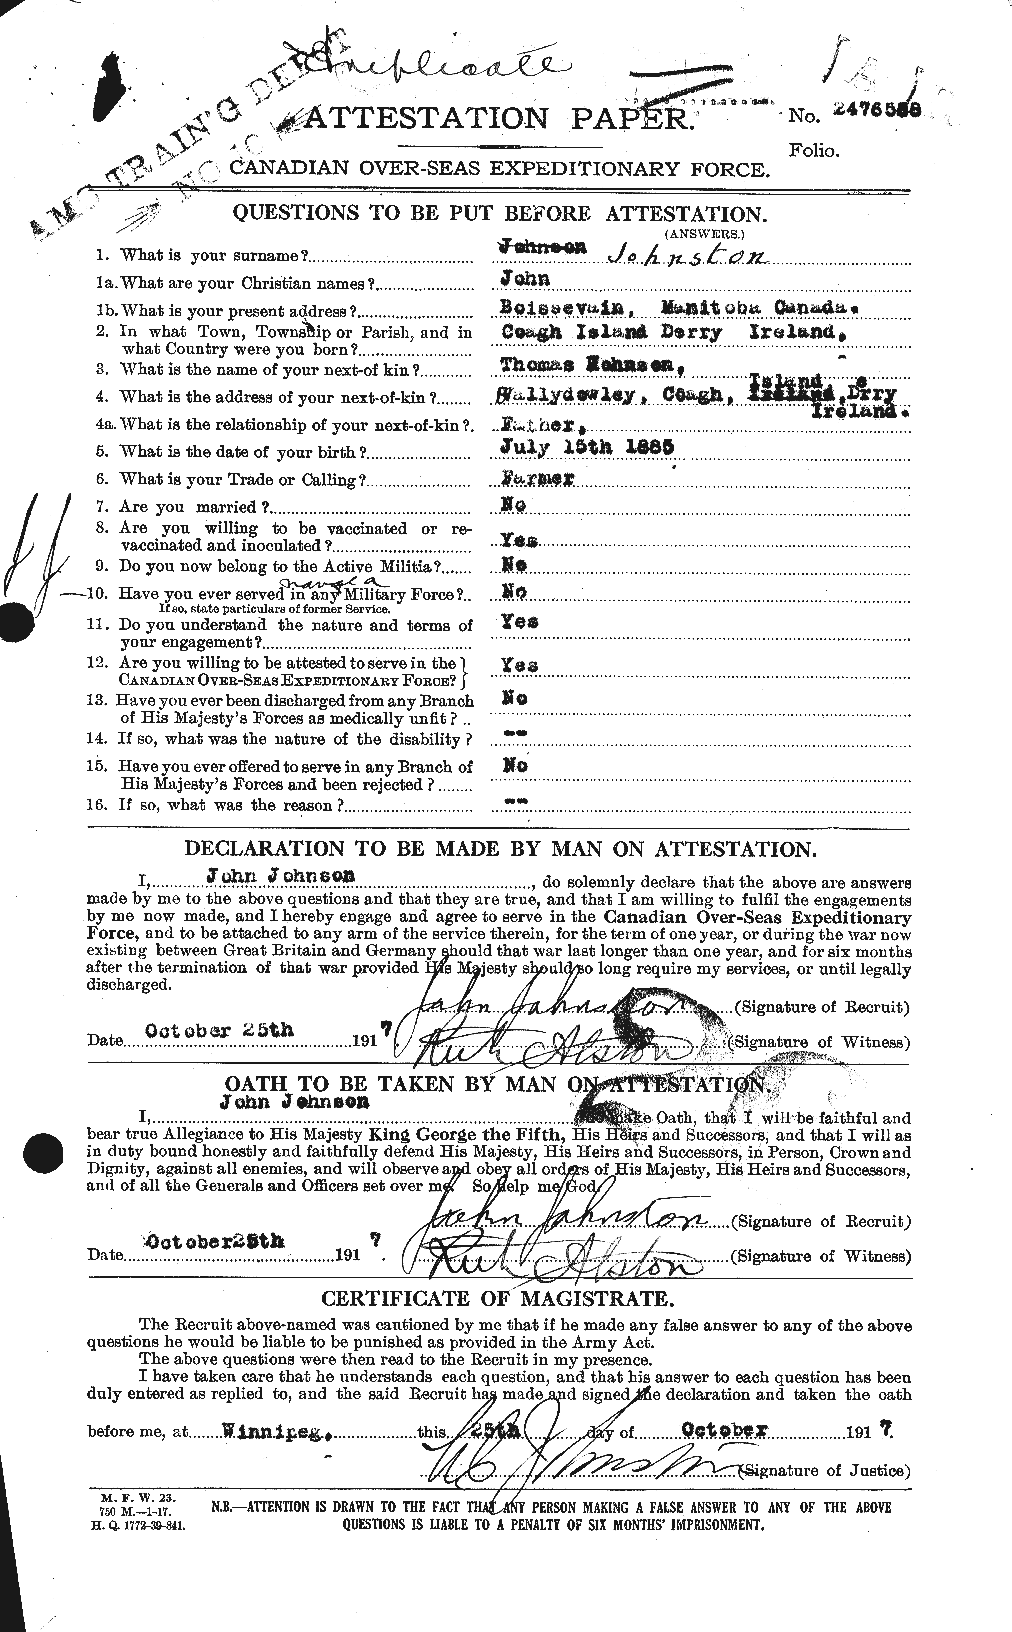 Personnel Records of the First World War - CEF 422774a